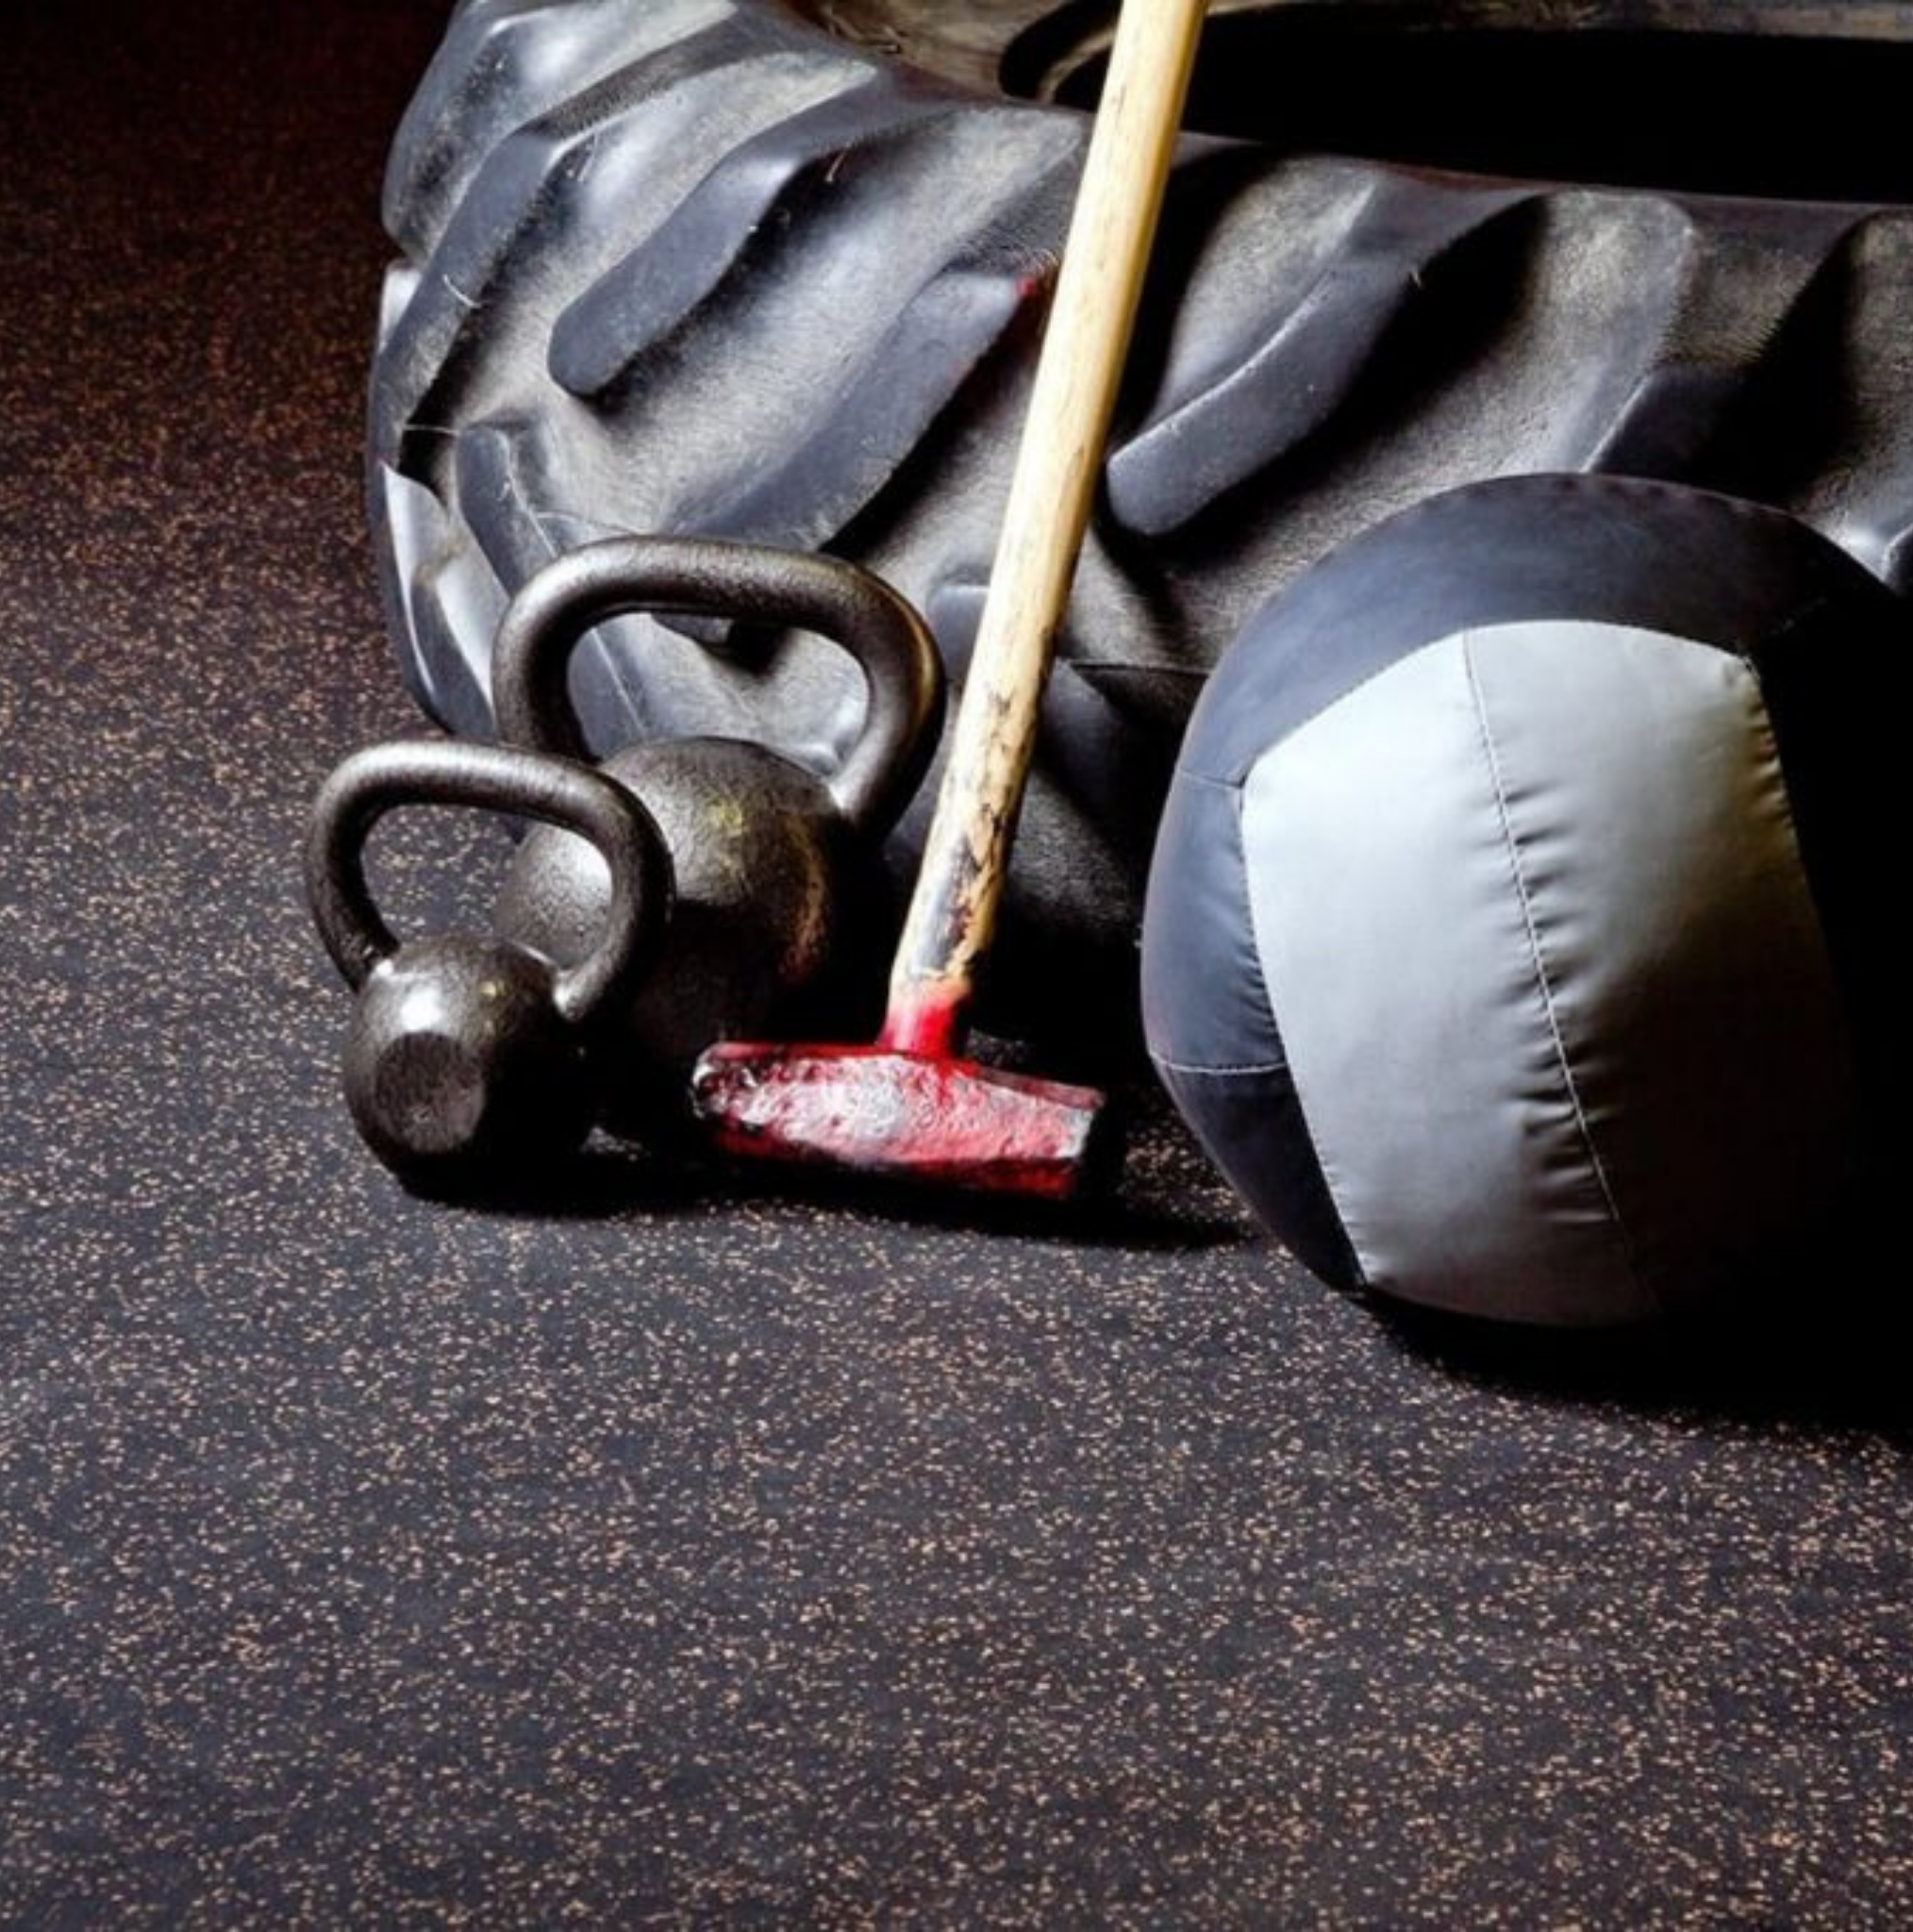 Gator® Gym Rubber Mats 4' x 6' Thickness 18mm $2.98 - $5.81 Price/ Sq. Ft.